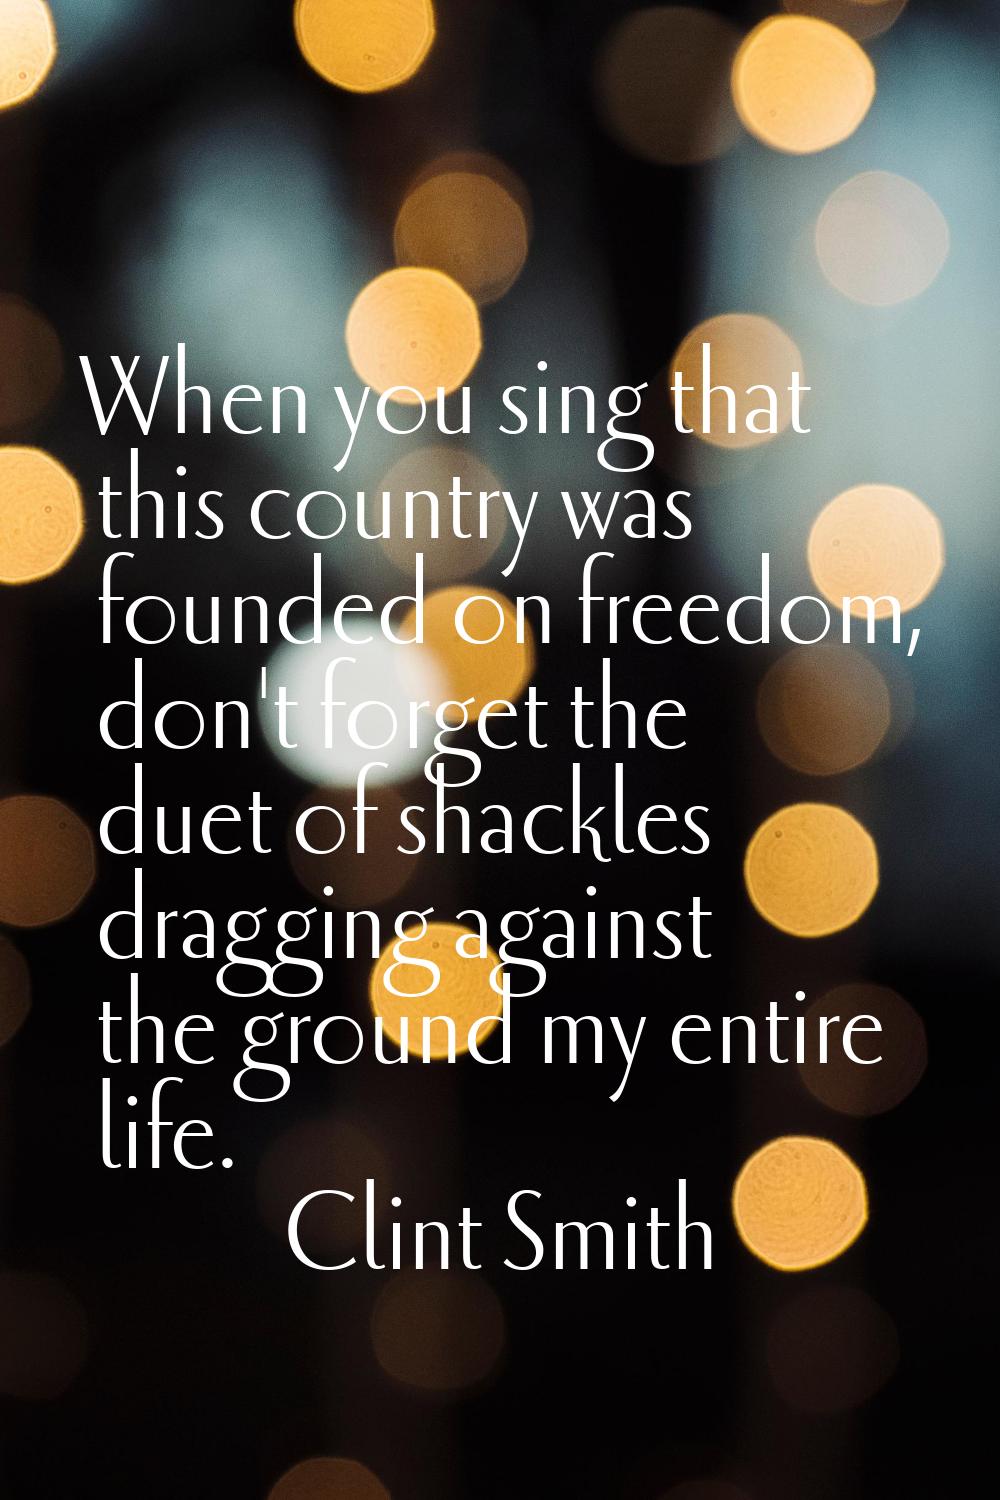 When you sing that this country was founded on freedom, don't forget the duet of shackles dragging 